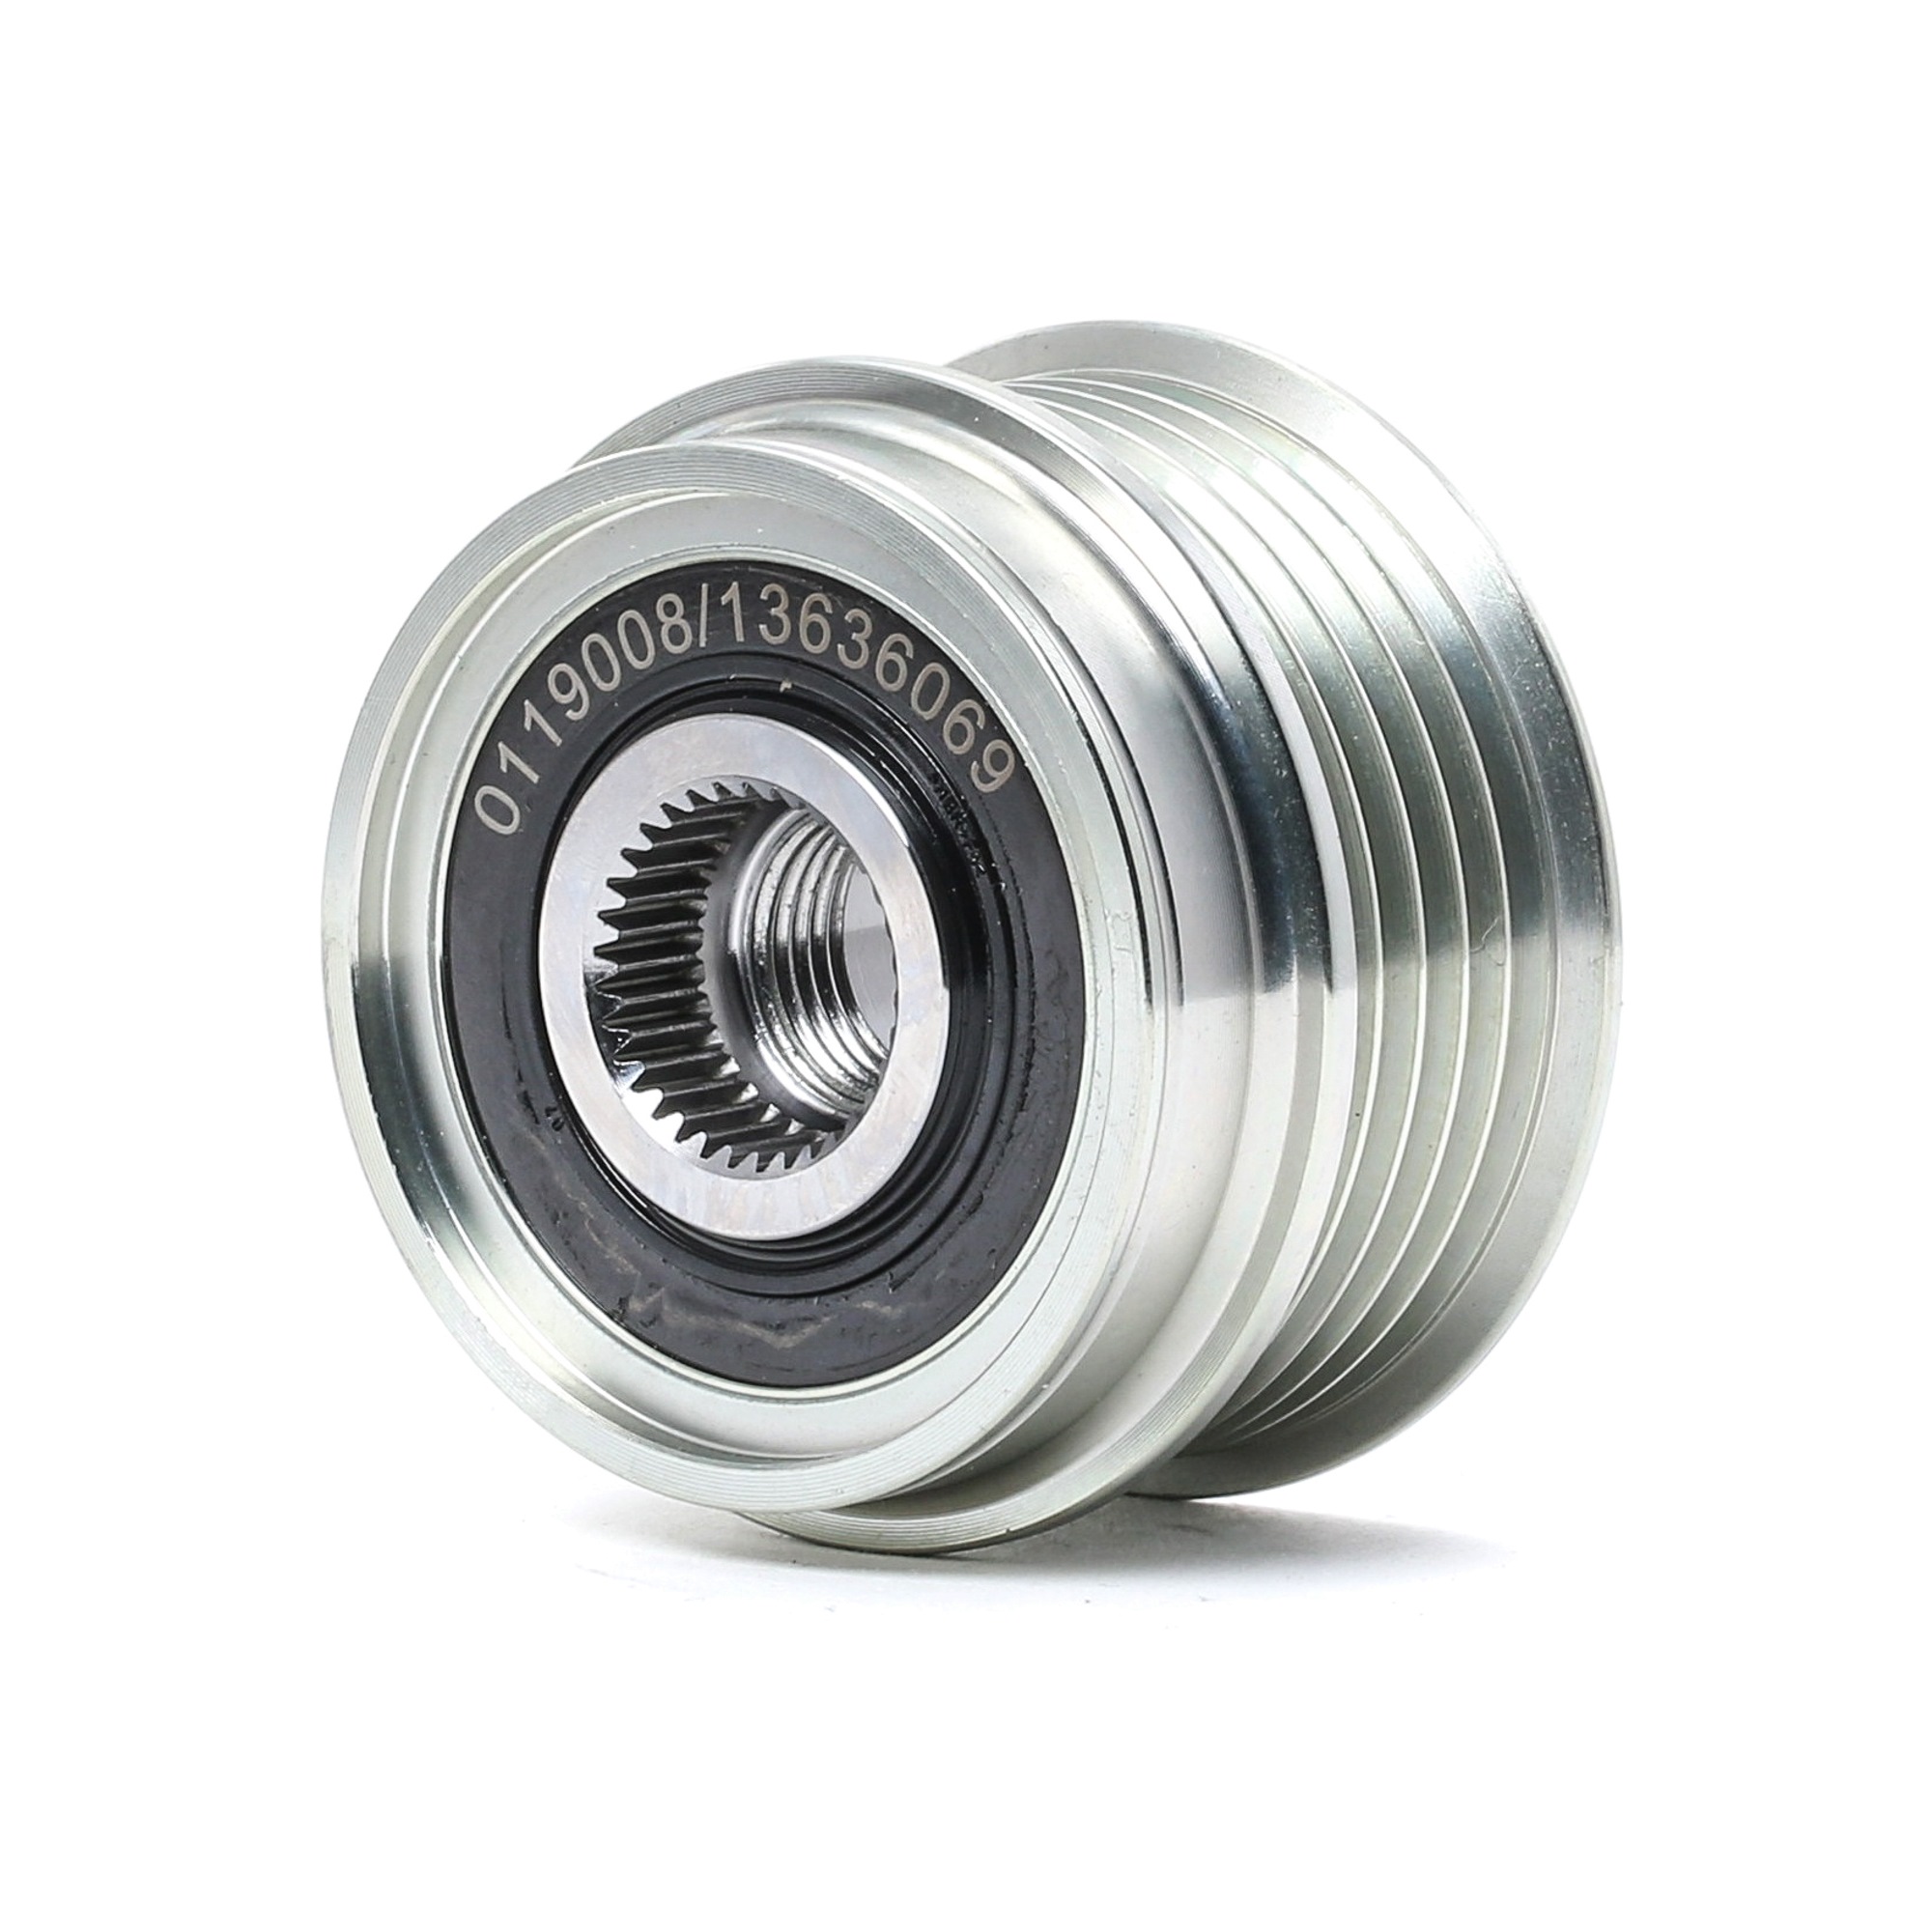 STARK SKFC-1210049 Alternator Freewheel Clutch Width: 35mm, Requires special tools for mounting